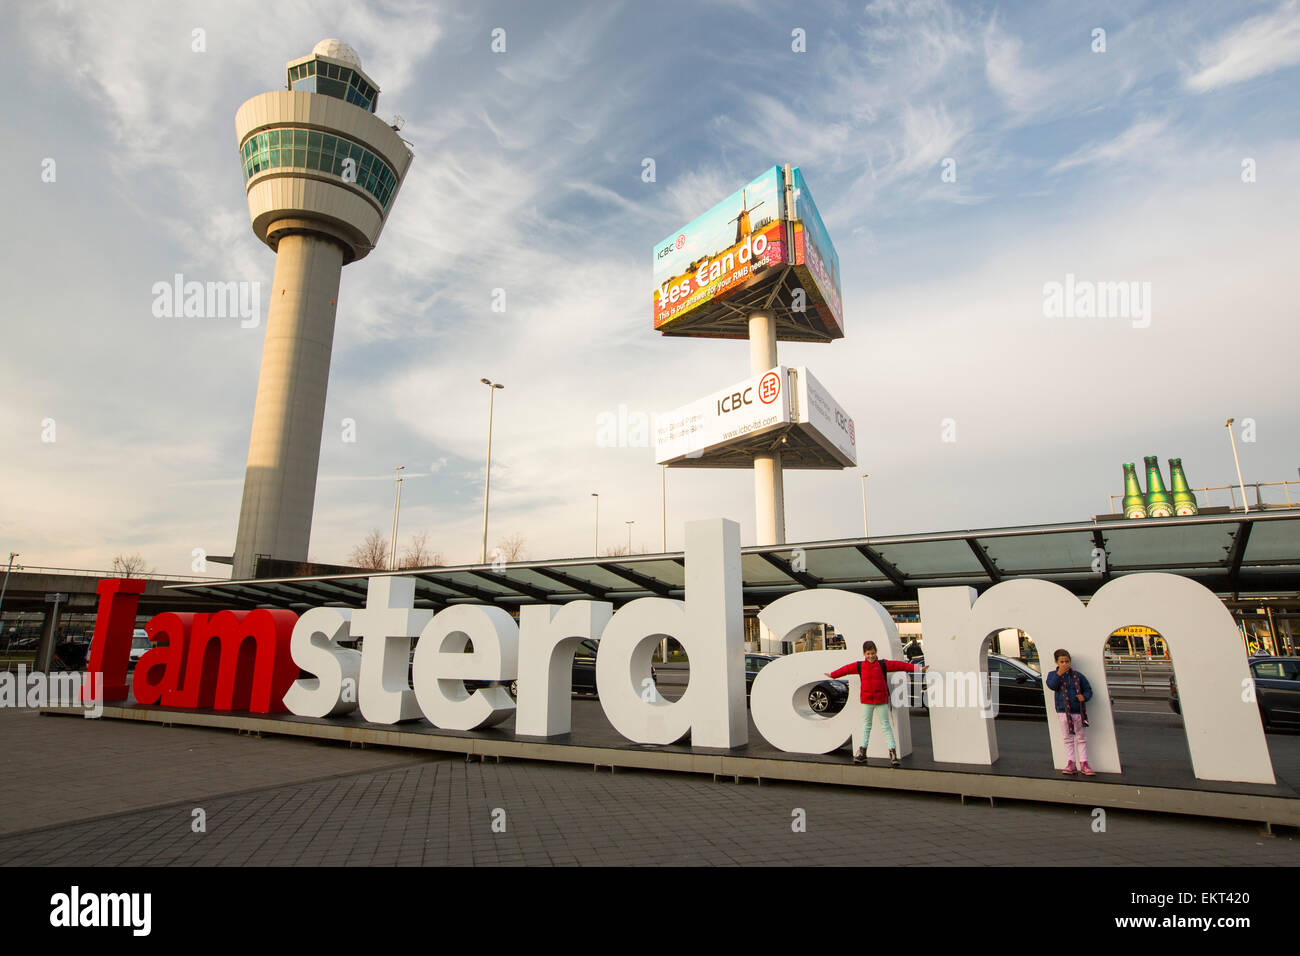 Schiphol airport in Amsterdam, Holland. Stock Photo